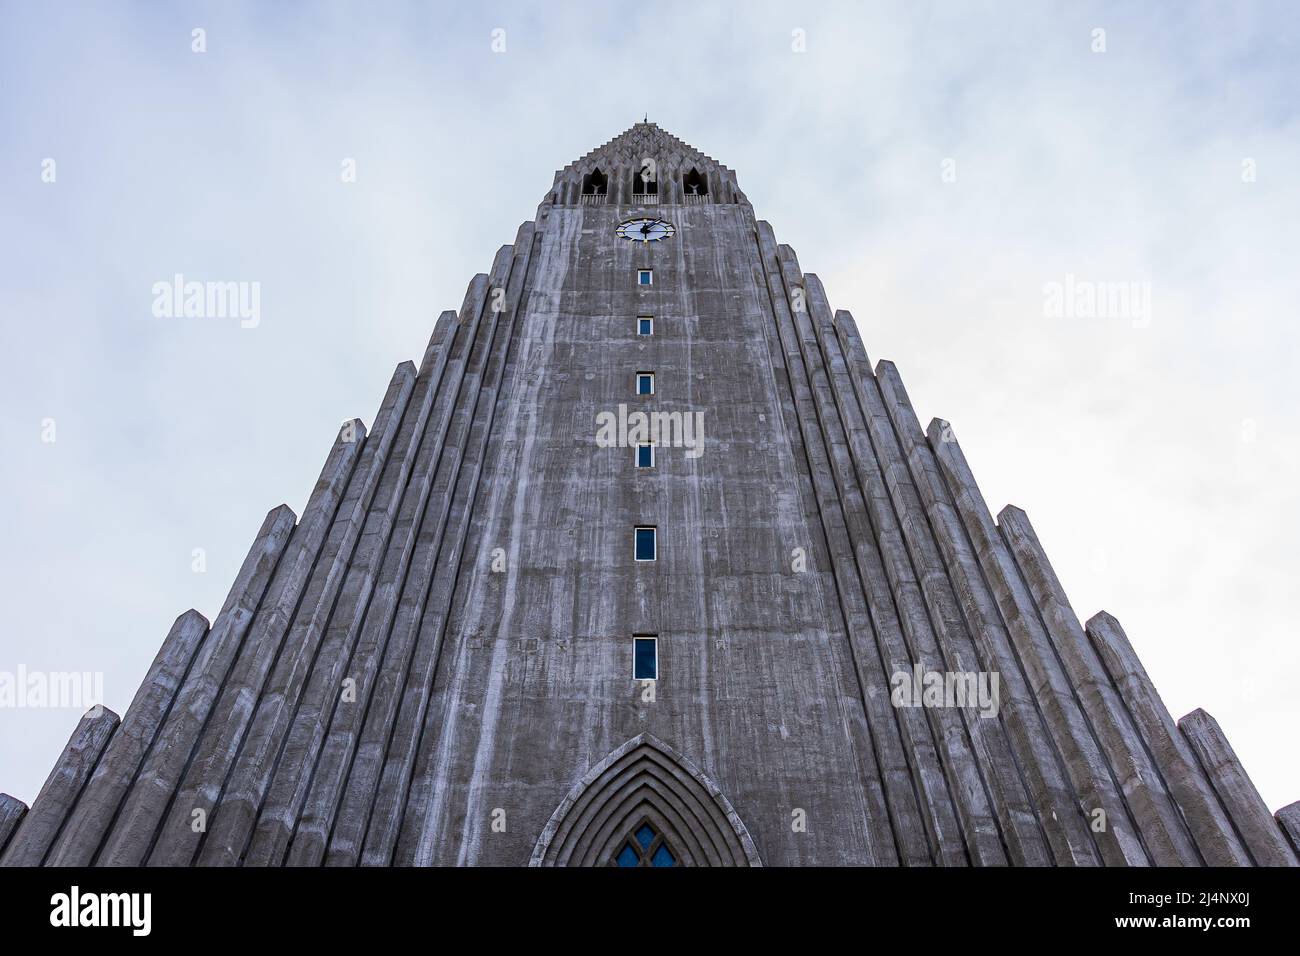 Beautiful aerial footage of the Icelands capital Reykjavik, the Cathedral of Hallgrimskirkja and Beautiful city Stock Photo